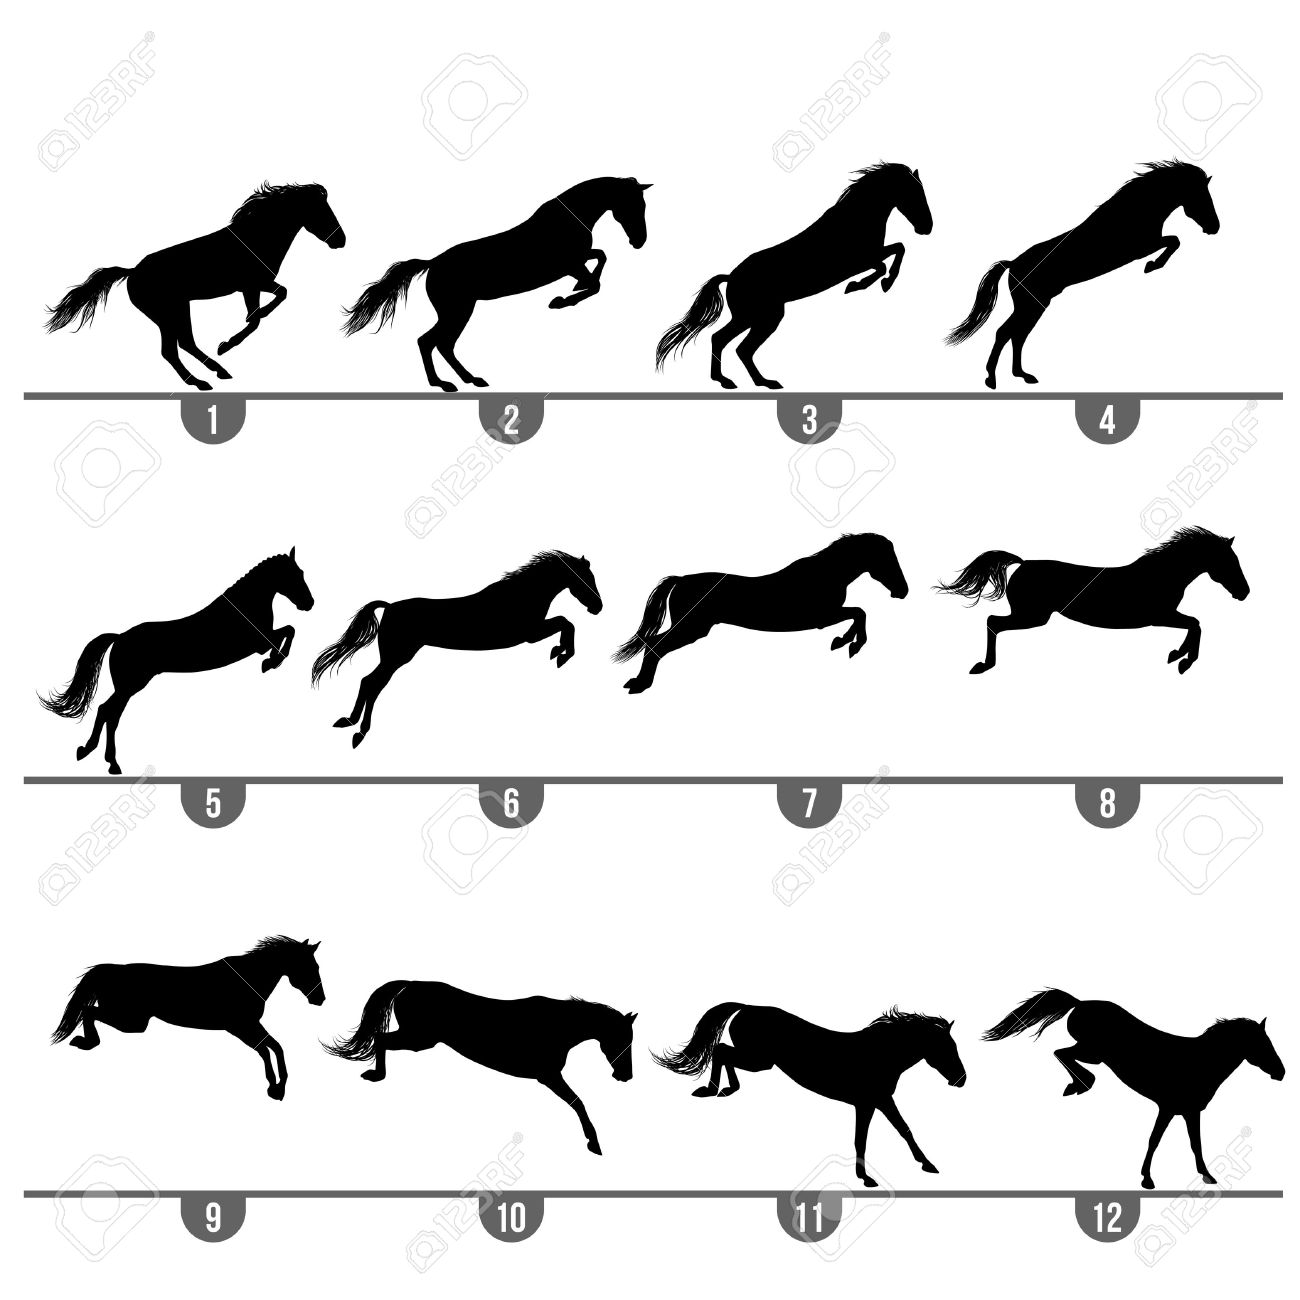 horse jumping: Set of 12 jumping horse phases silhouettes